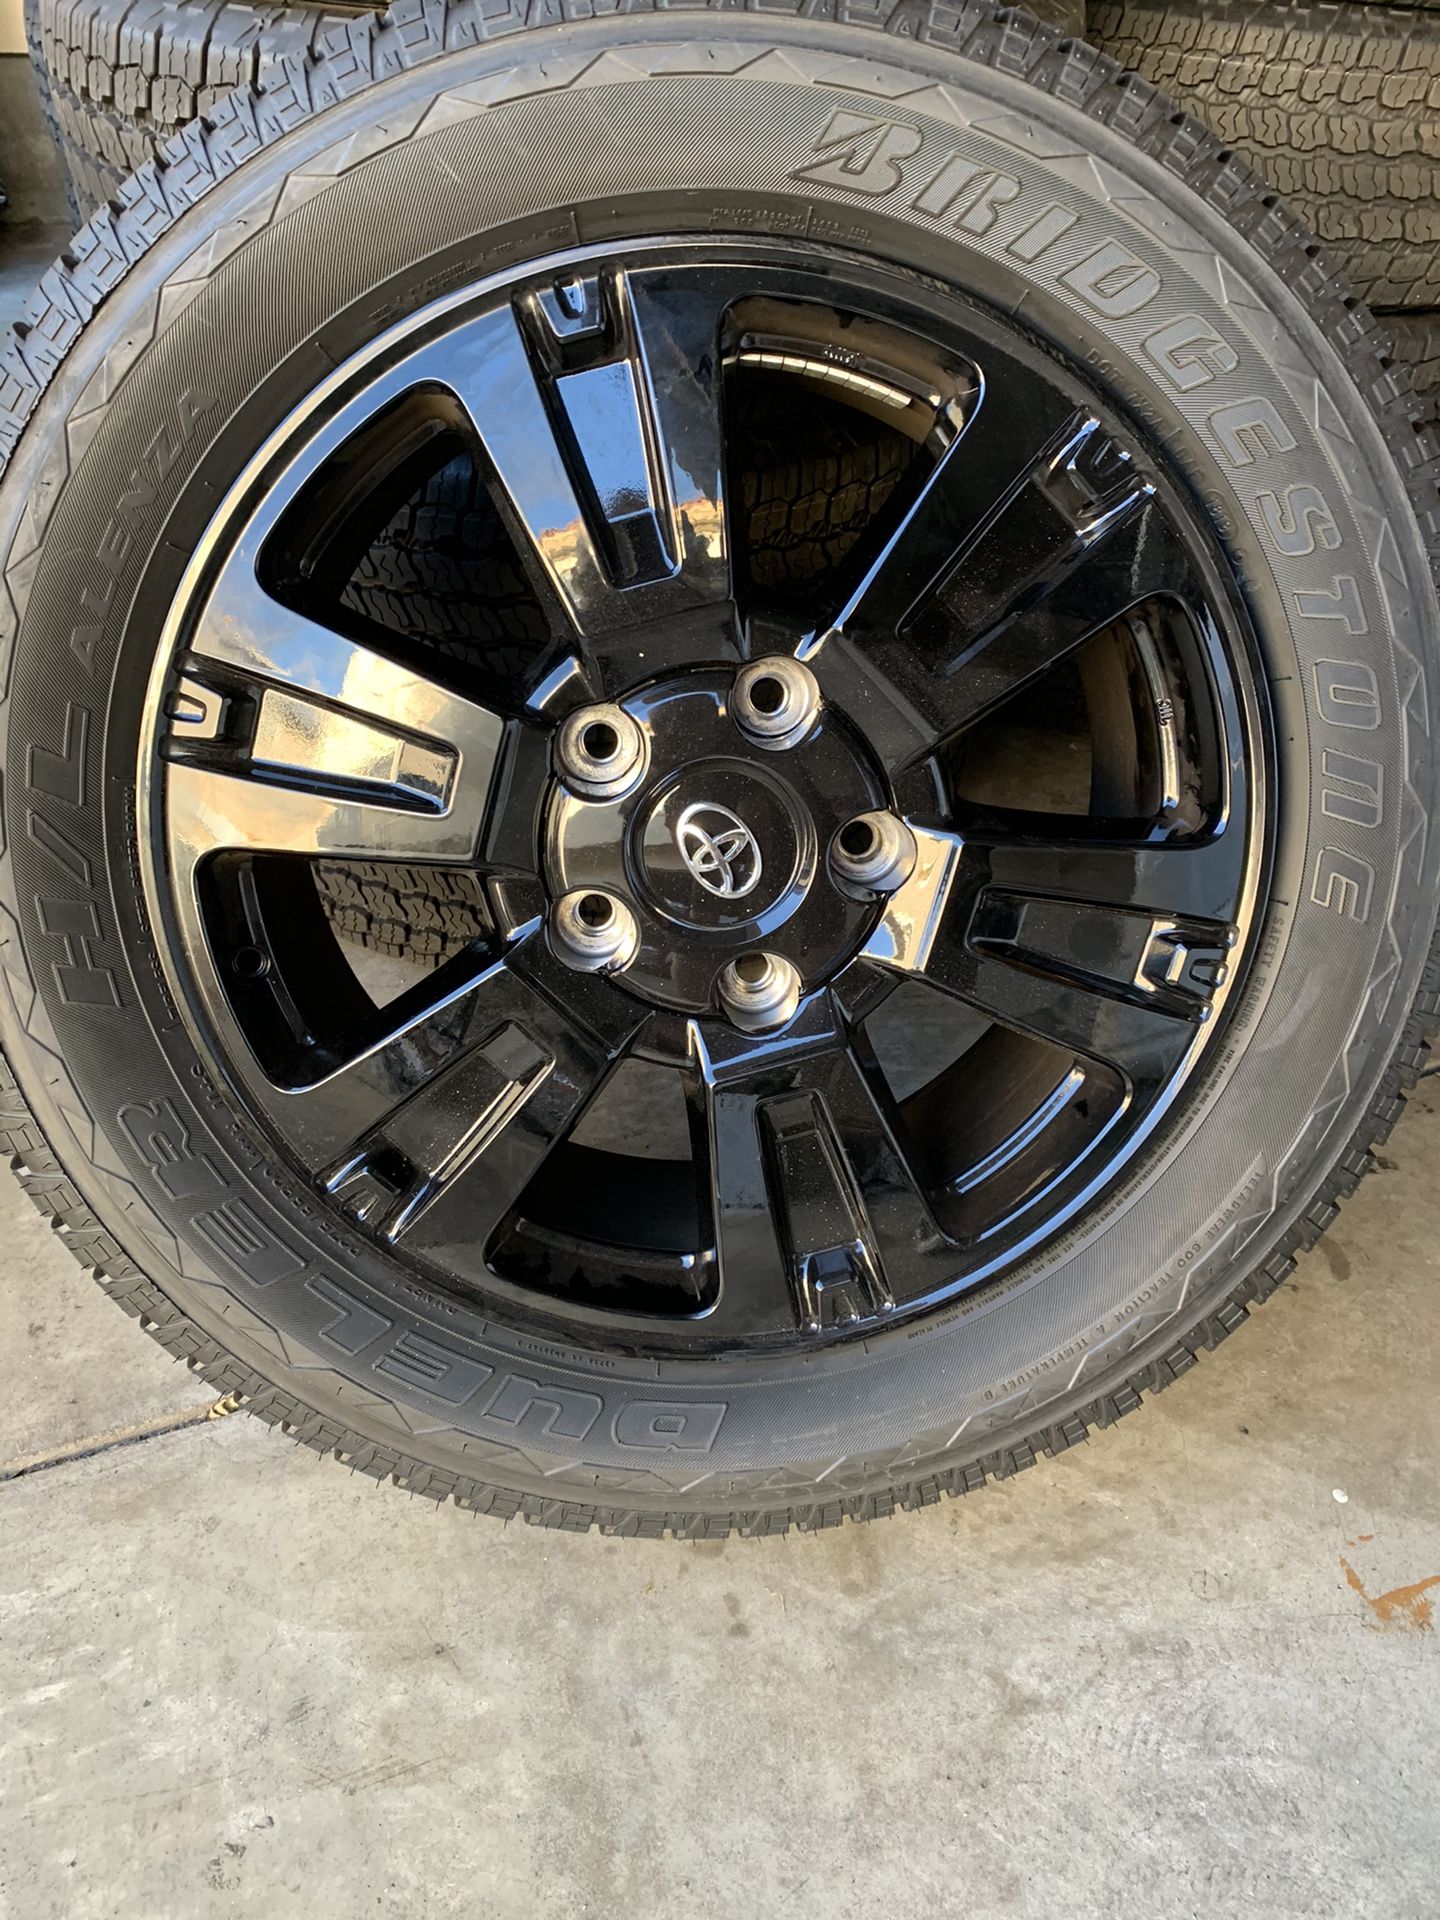 Toyota Tundra wheels and tires 20”